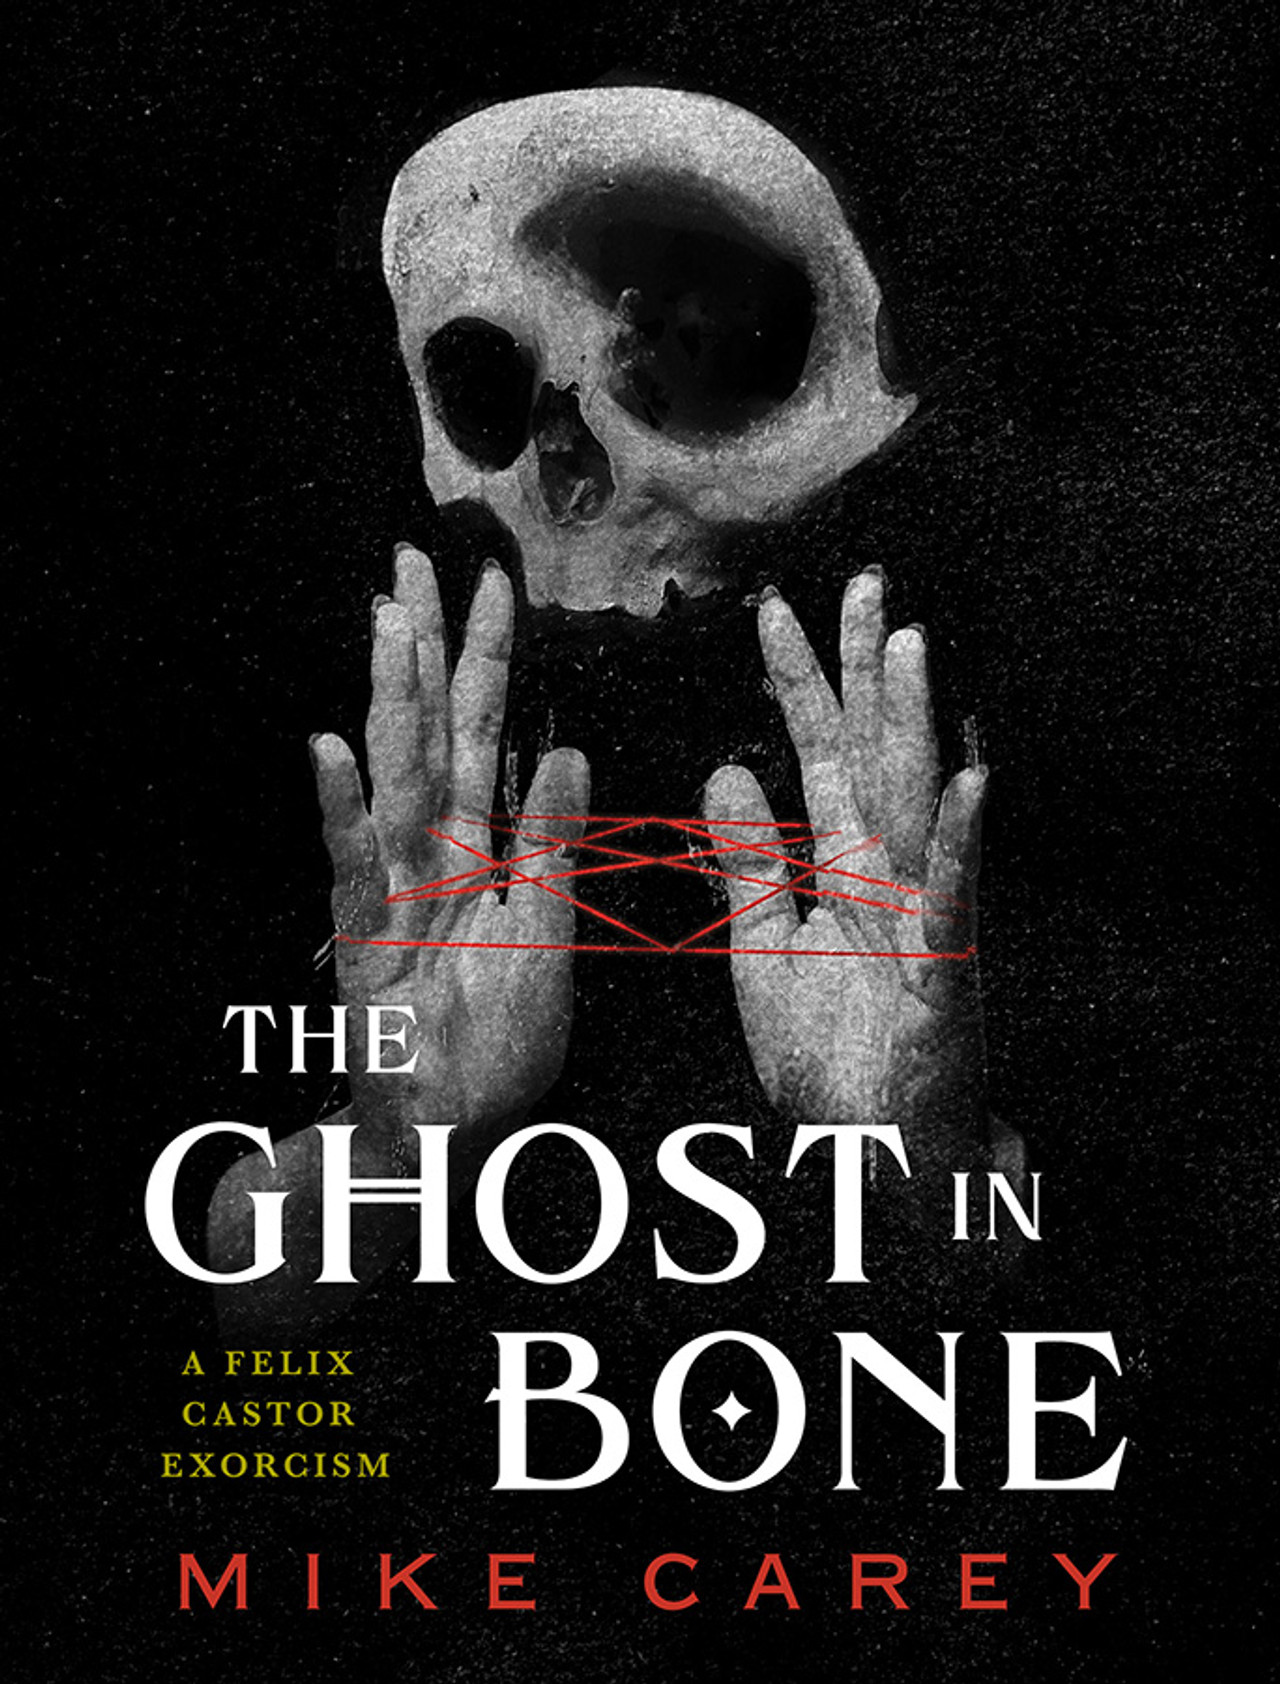 The Ghost in Bone by Mike Carey